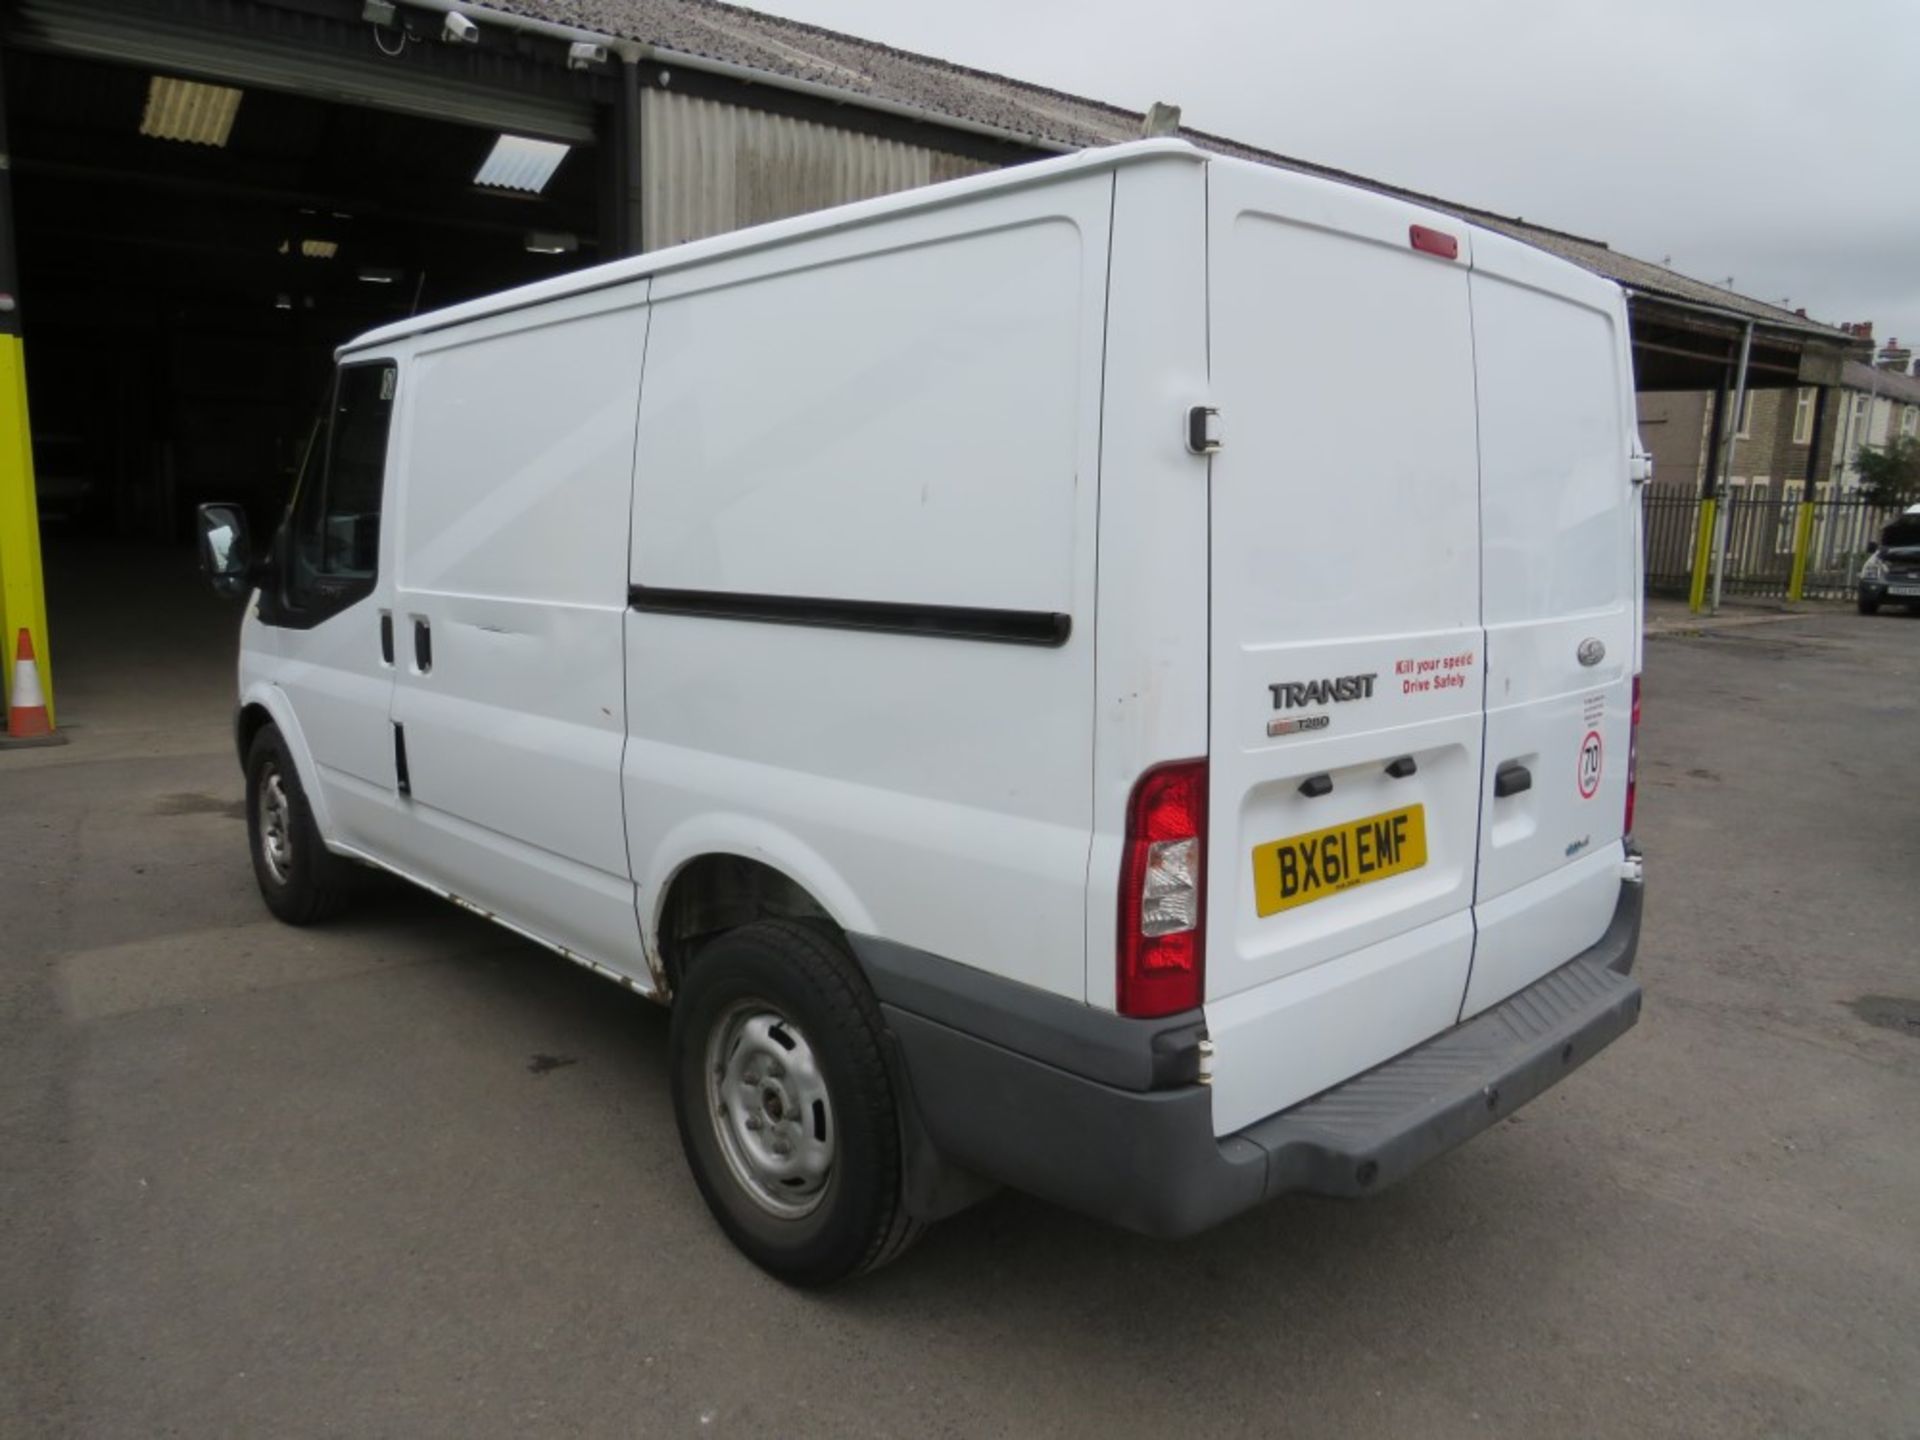 61 reg FORD TRANSIT 115 T280S ECON FW, 1ST REG 09/11, TEST 05/21, 151600M WARRANTED, V5 HERE, 1 - Image 3 of 6